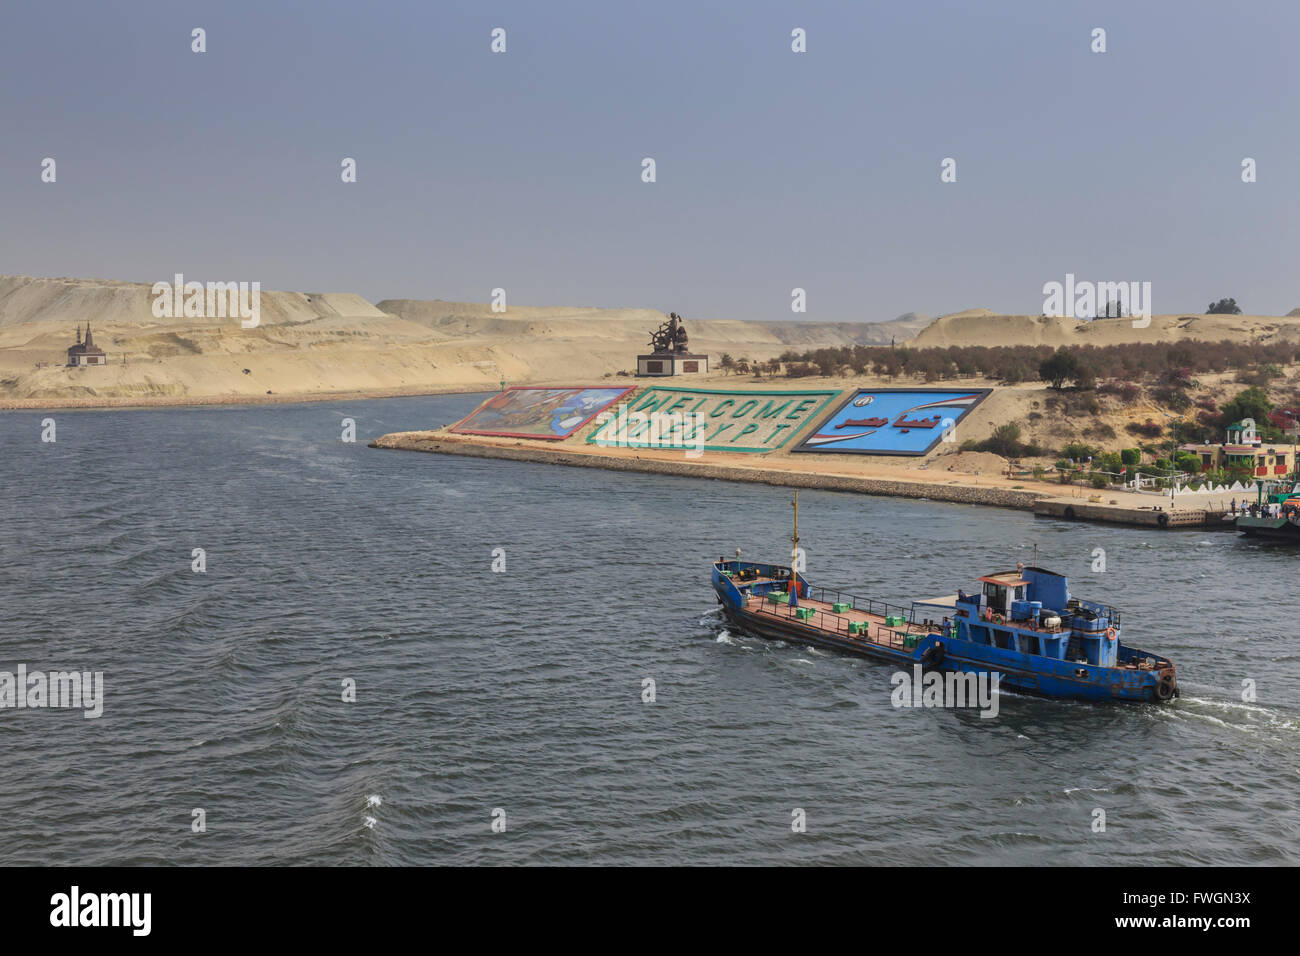 Small ship travels on the Suez Canal, past memorials and a large Welcome to Egypt sign, Ismalia, Egypt, North Africa Stock Photo